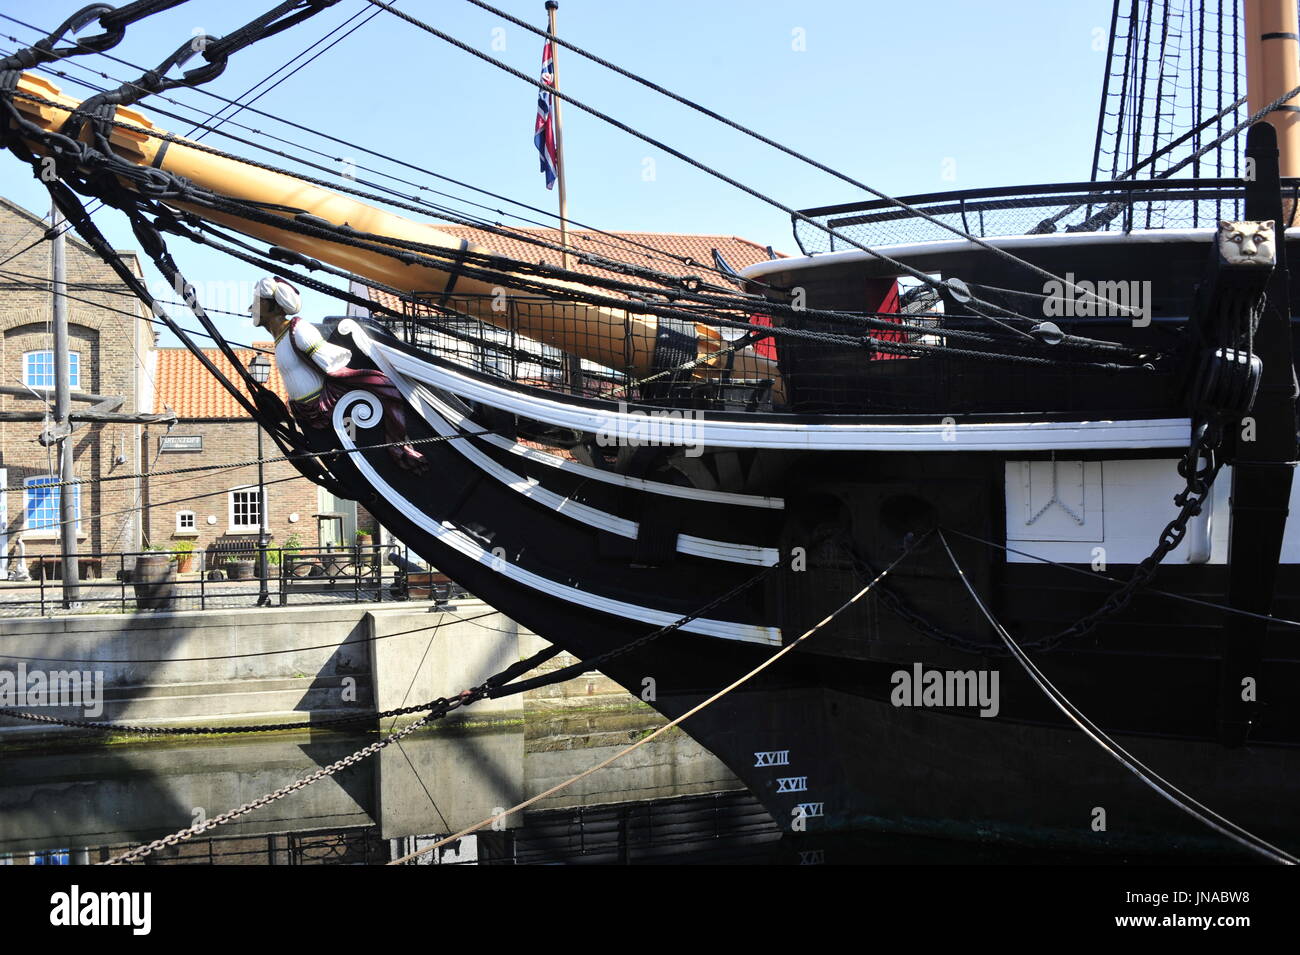 AJAXNETPHOTO. - 19TH JULY, 2016. HARTLEPOOL, ENGLAND. - HISTORICAL SHIP MUSEUM - THE RESTORED 19TH CENTURY FRIGATE HMS TRINCOMALEE (EX T.S.FOUDROYANT, EX TRINCOMALEE.). BOW AND FIGUREHEAD DETAIL. PHOTO:TONY HOLLAND/AJAX REF:DTH161907 32263 Stock Photo